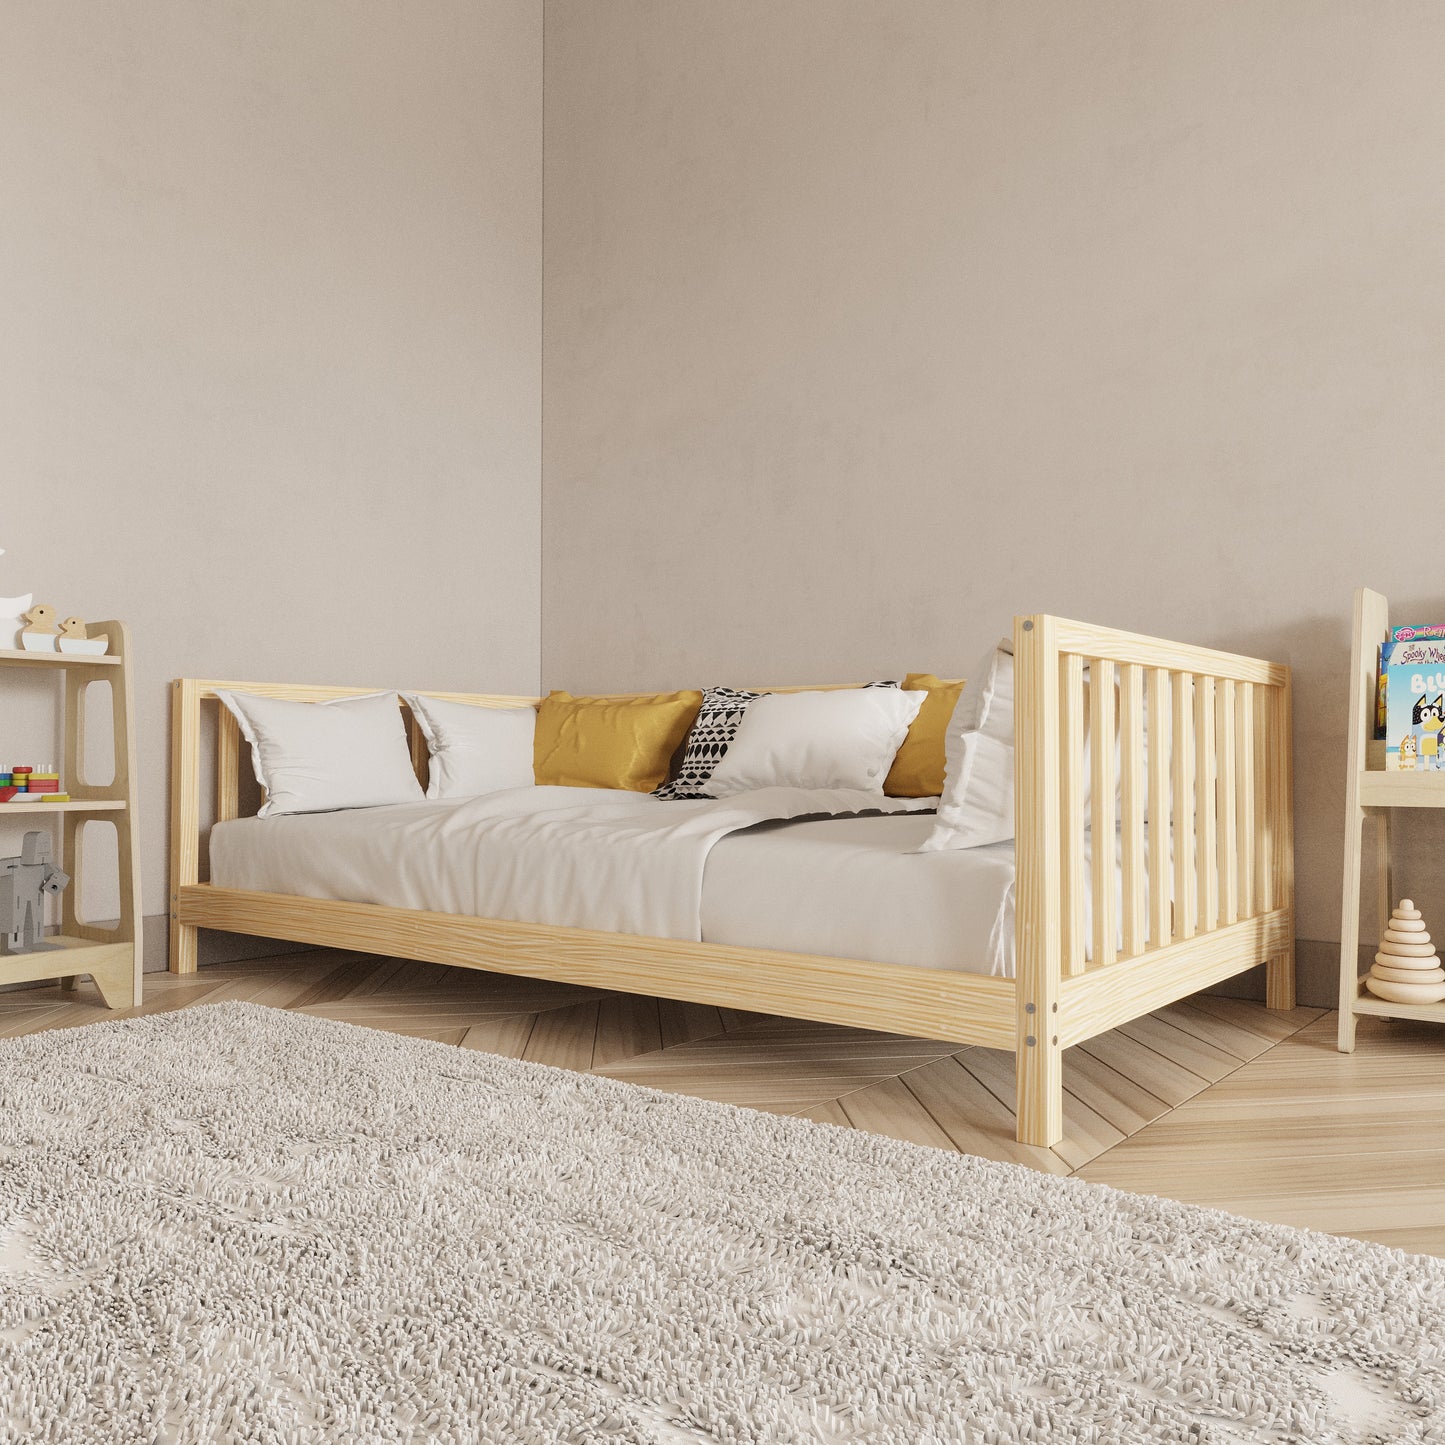 Open Access Montessori Bed with Legs - Montoddler 